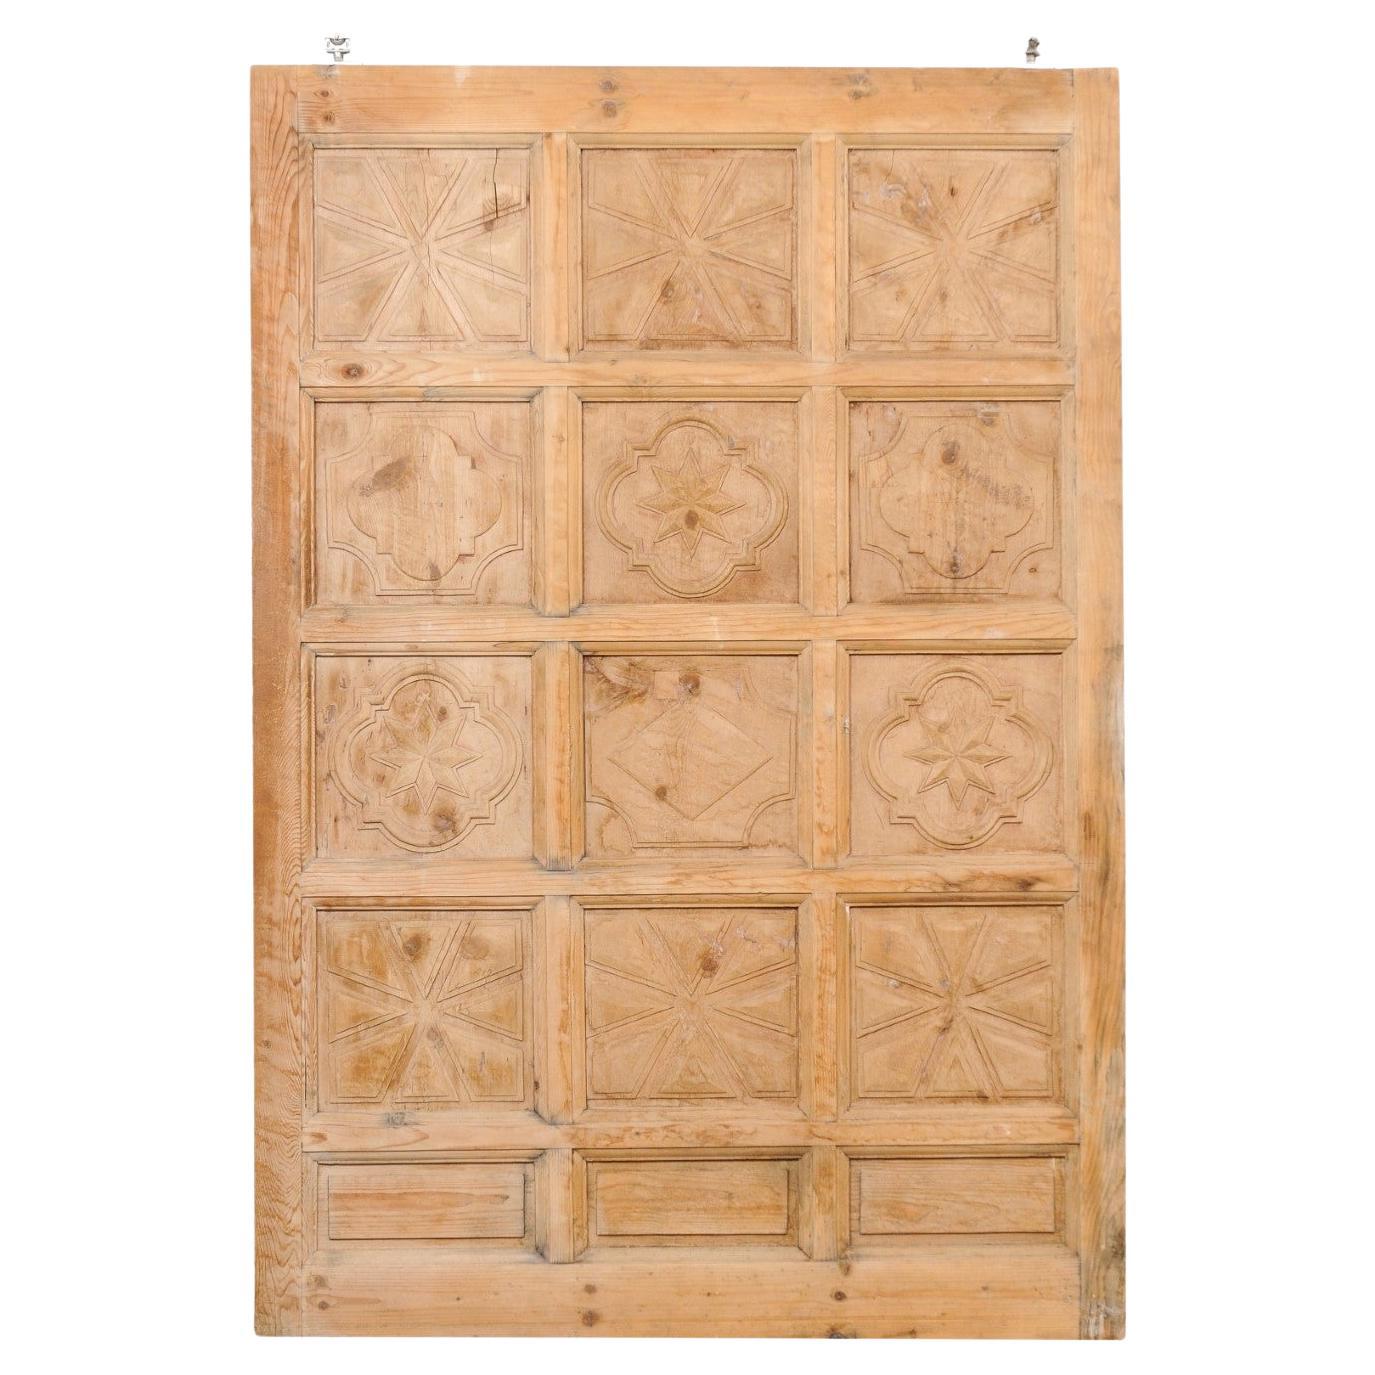 A Large-Sized Spanish Wooden Door w/Decoratively Carved Panels For Sale